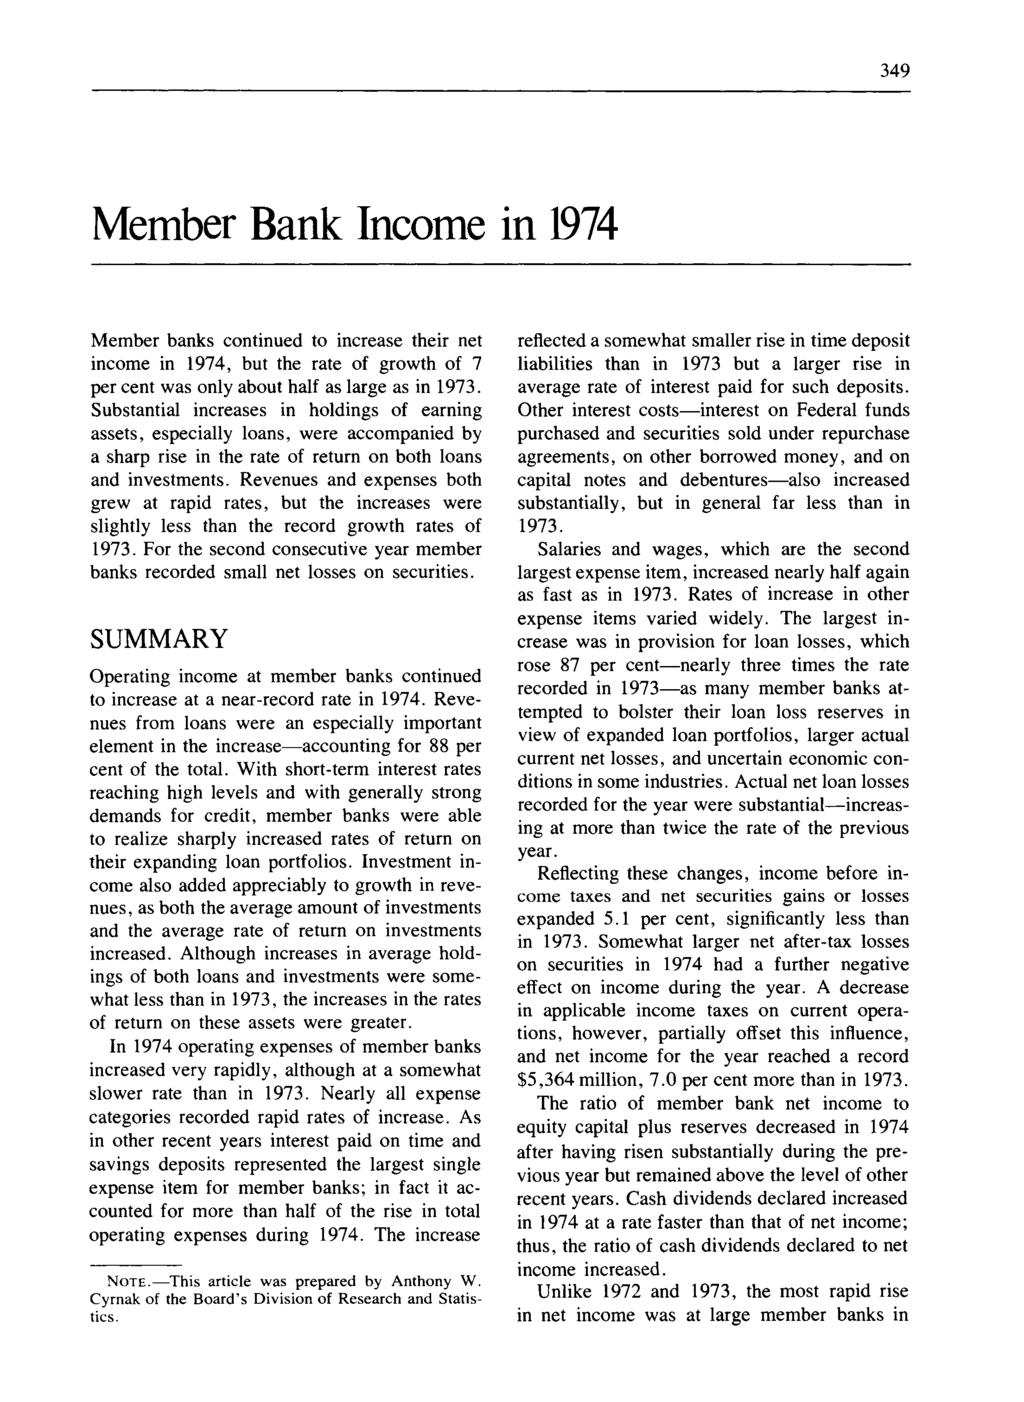 349 Member Bank Income in 1974 Member banks continued to increase their net income in 1974, but the rate of growth of 7 per cent was only about half as large as in 1973.